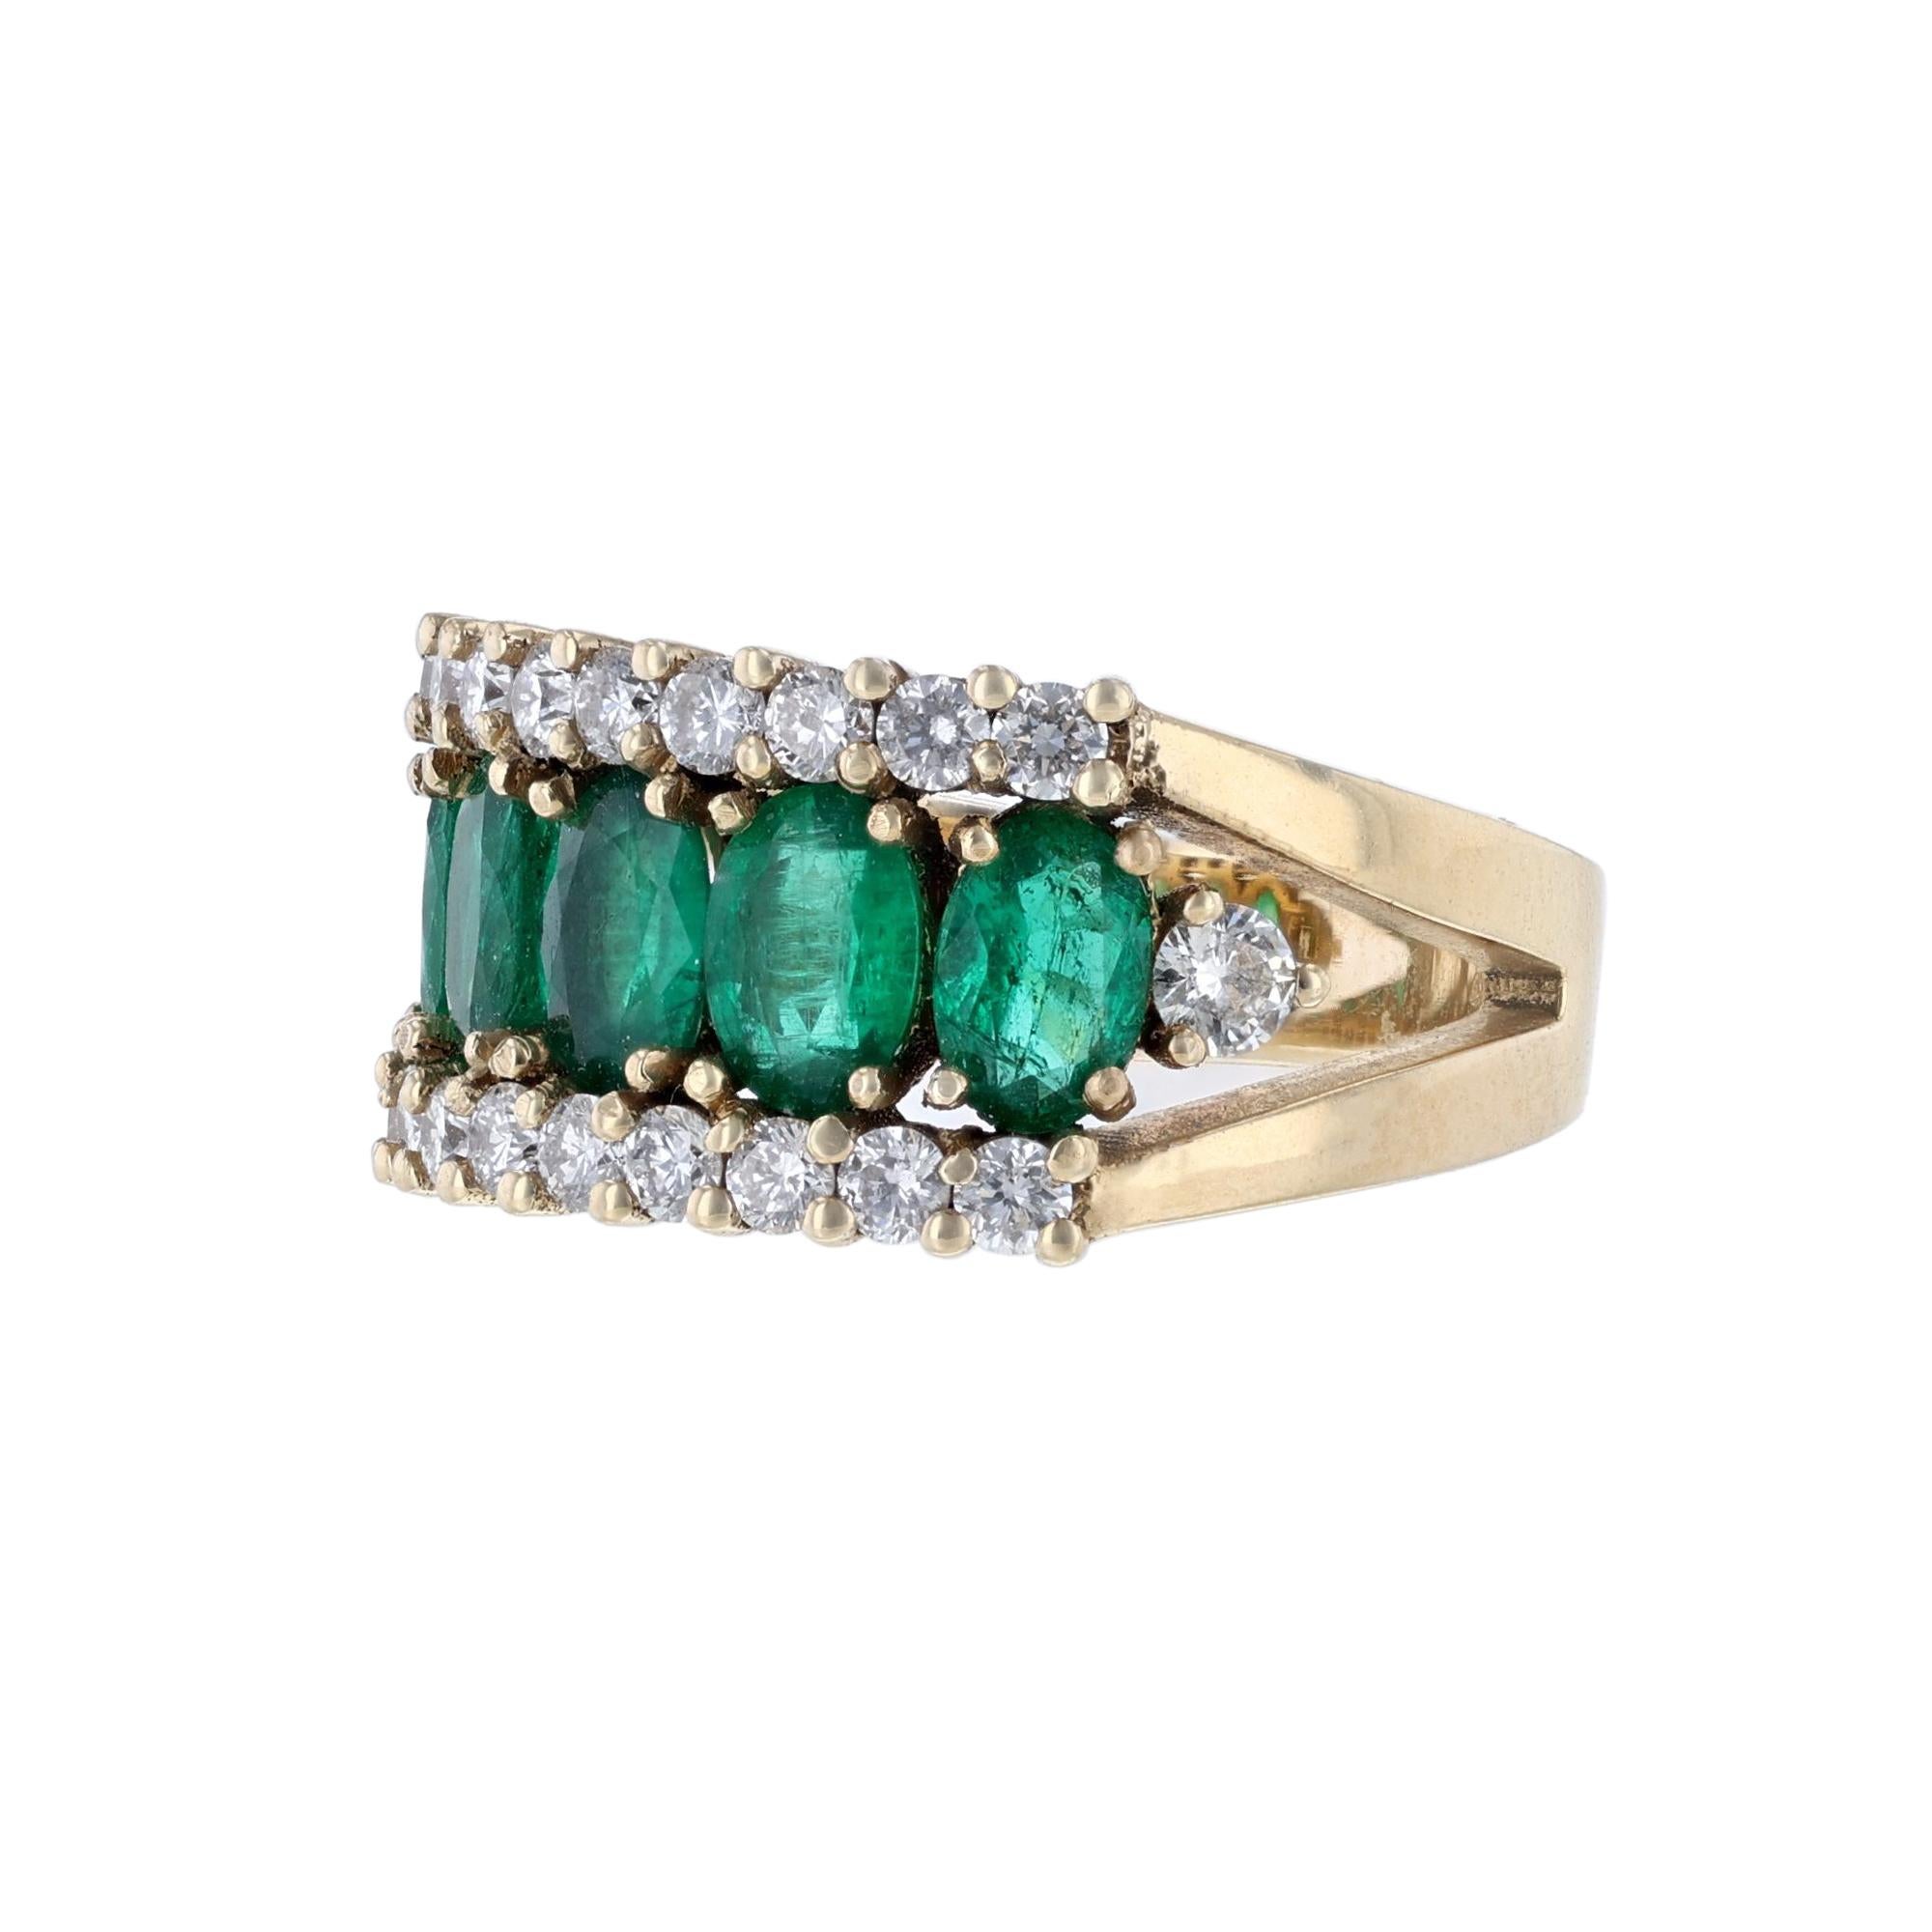 This ring is made in 14K yellow gold. It features 5 oval cut emeralds weighing 1.86 carats. Also features 20 round cut diamonds weighing 0.81 carat. The stones are all set with prongs. With a color grade (H) and clarity grade (SI2).

